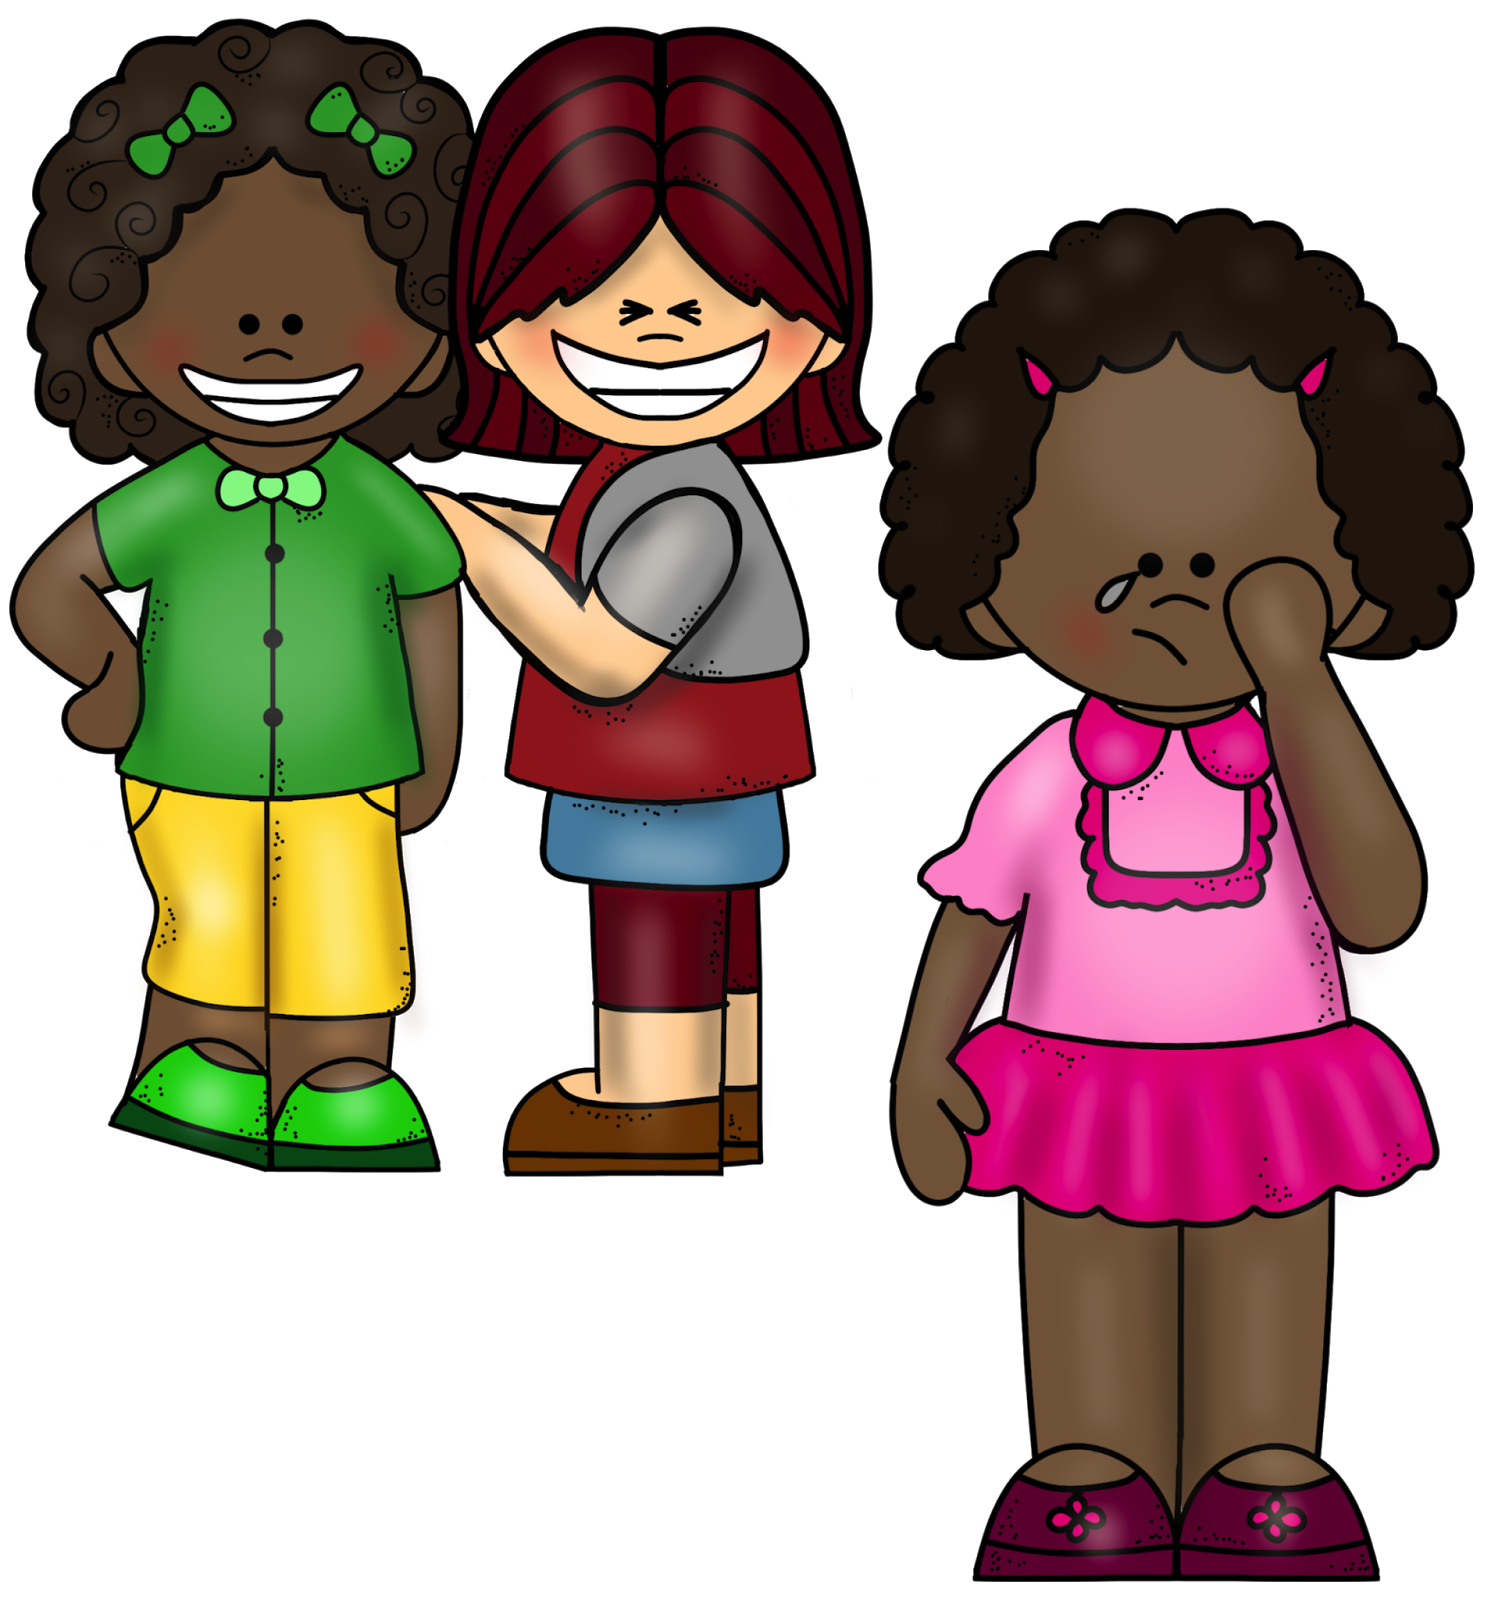 Bully clipart clipart images gallery for free download.